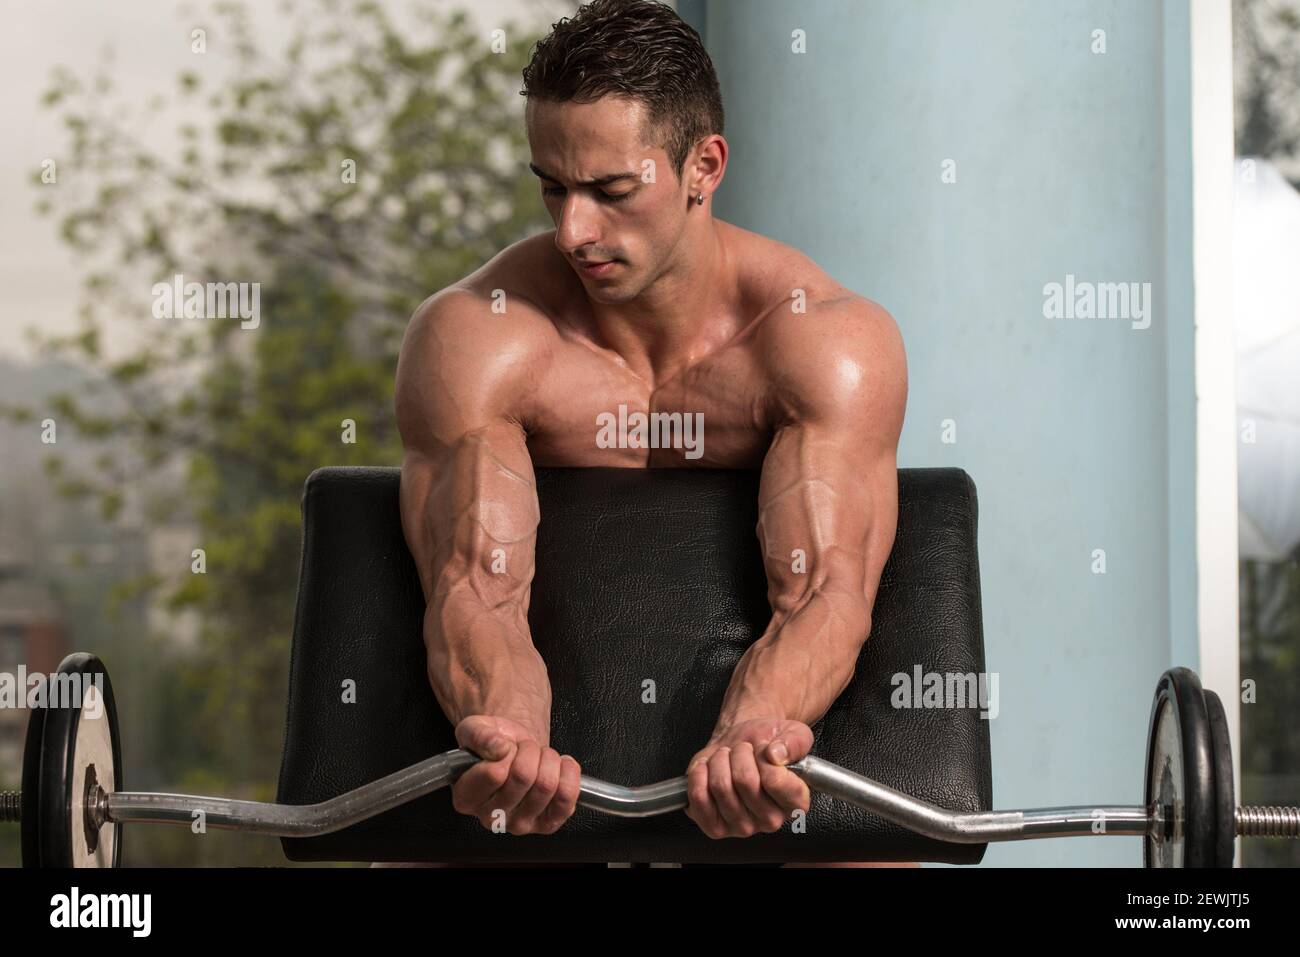 Muscular Man Doing Heavy Weight Exercise For Biceps. Stock Photo